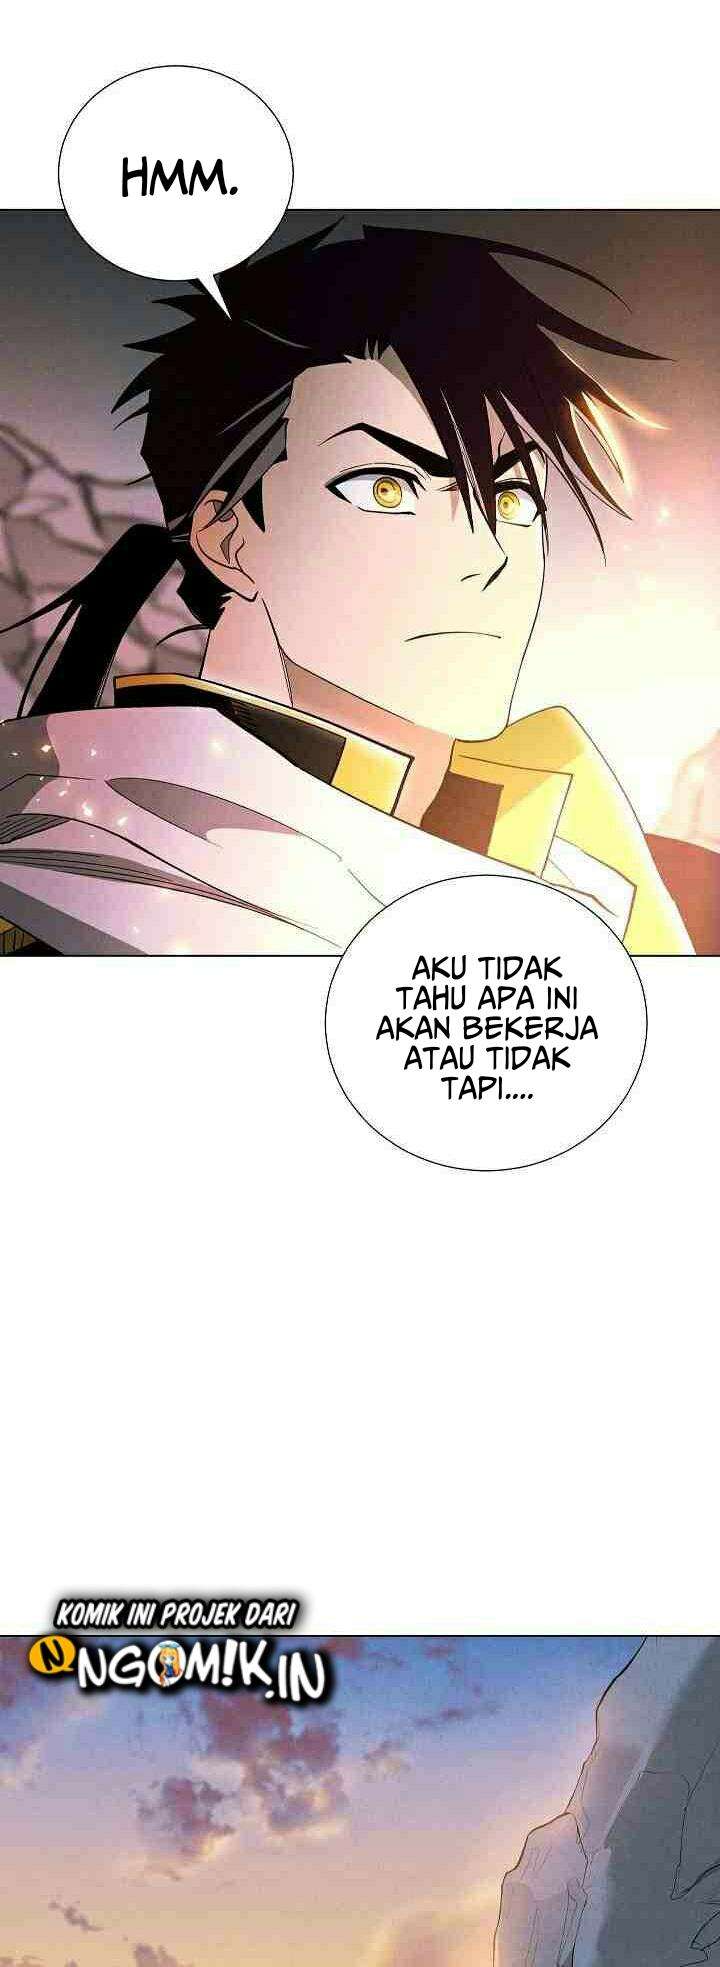 Seven Knights: Alkaid Chapter 07